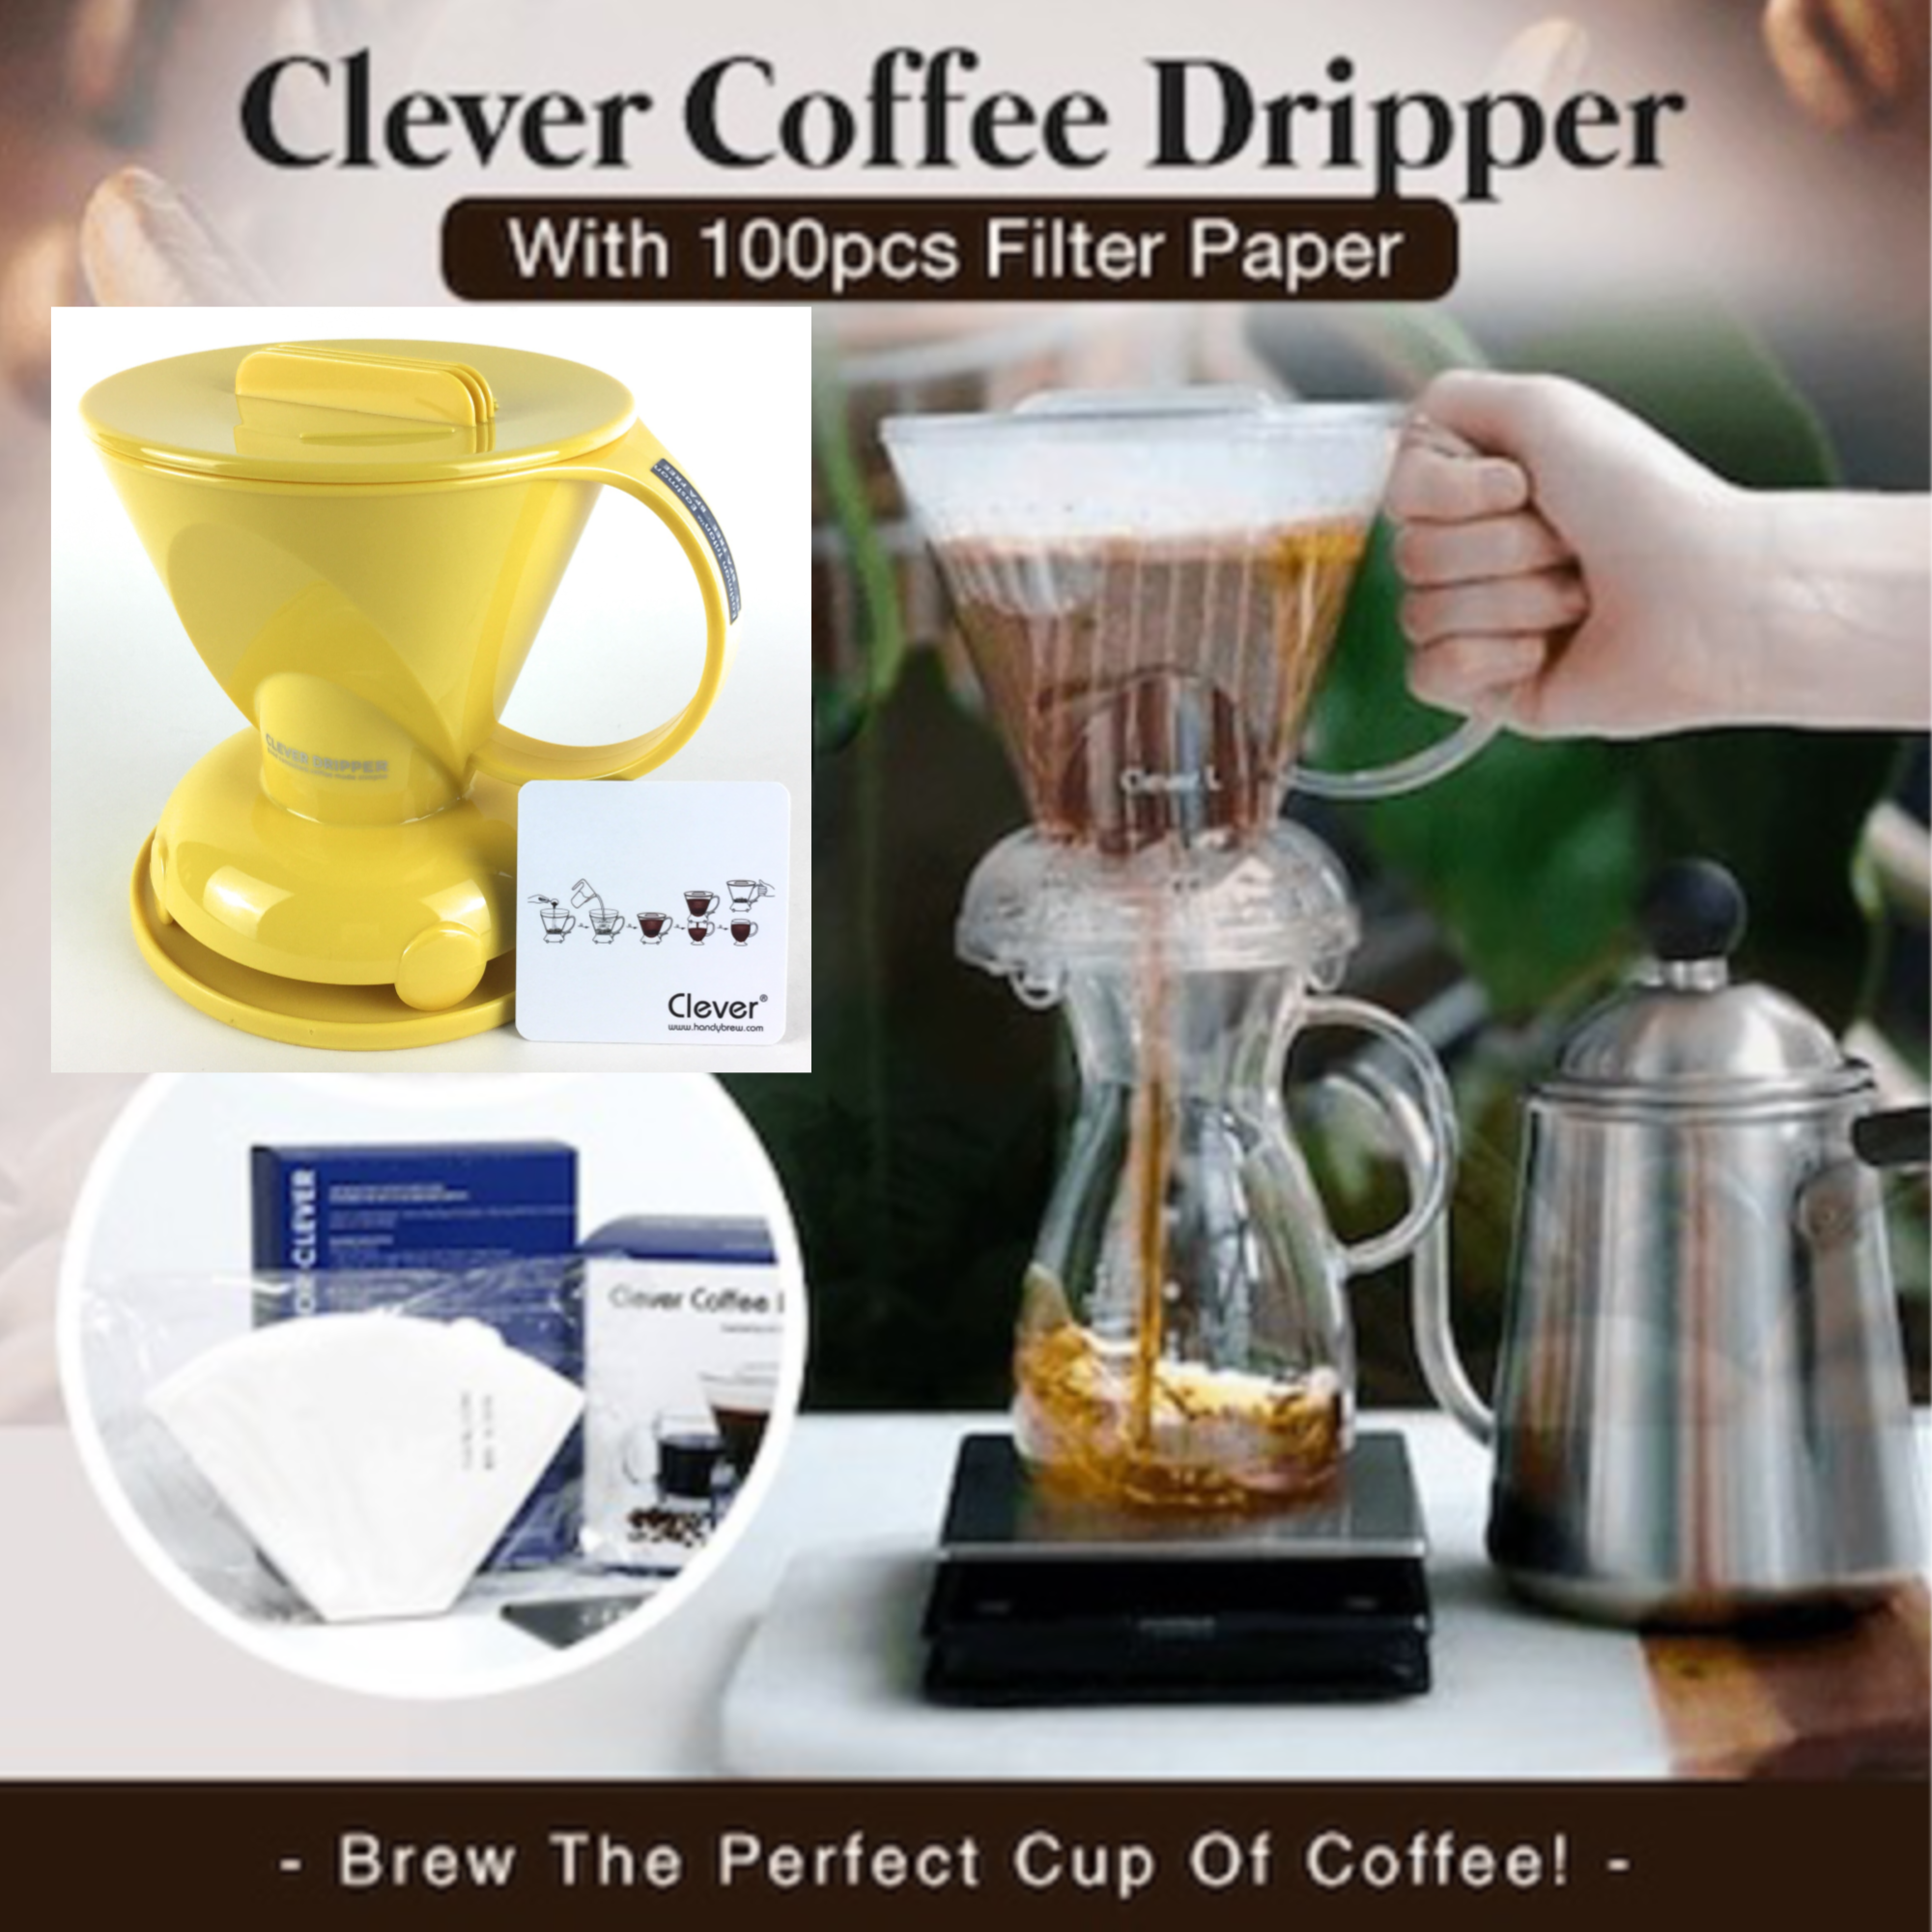 Clever Dripper Coffee Maker York Yellow, BPA Free, Hassle-Free